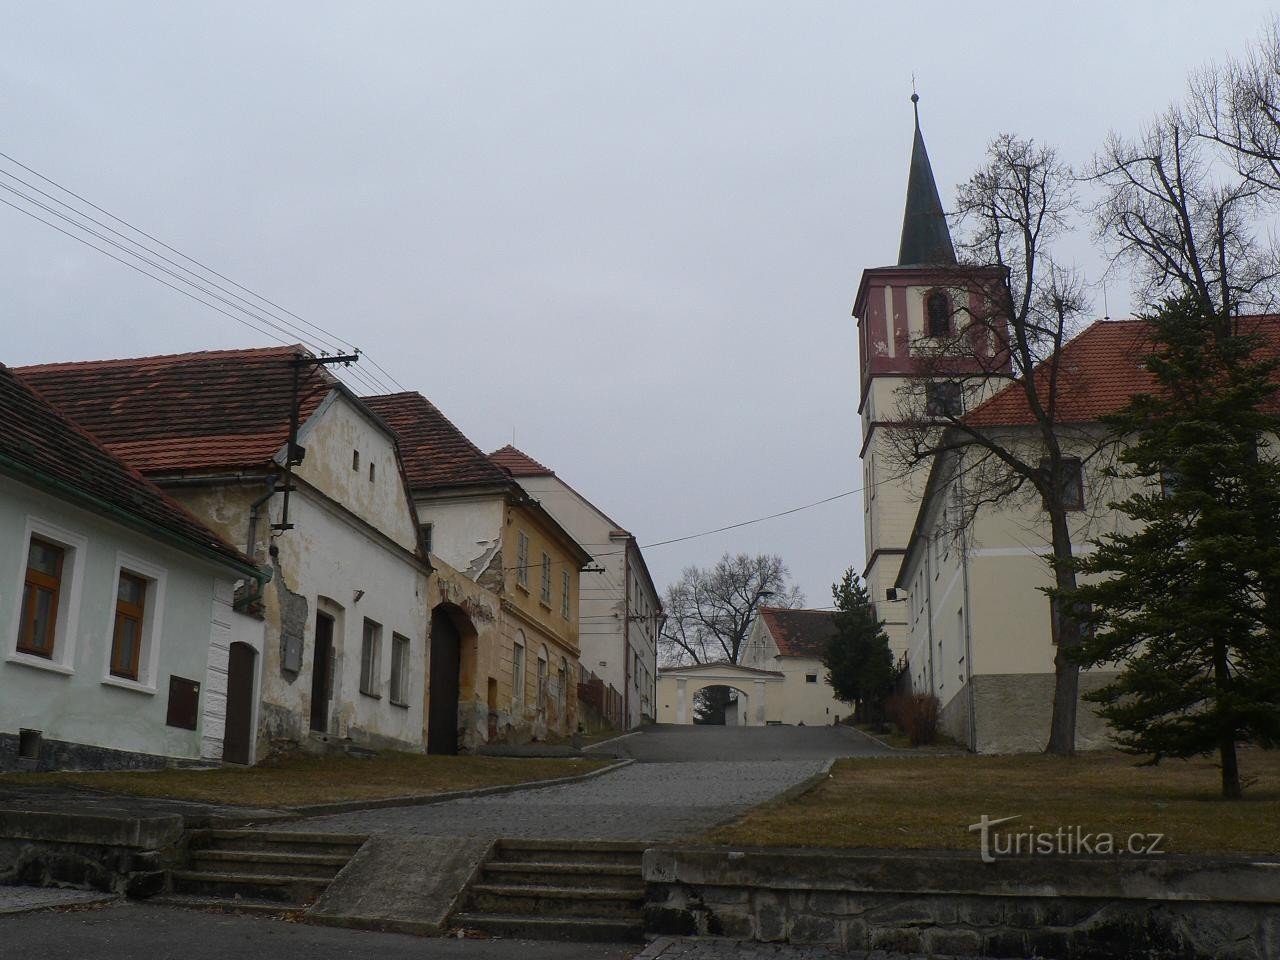 Volenice, part of the village near the church